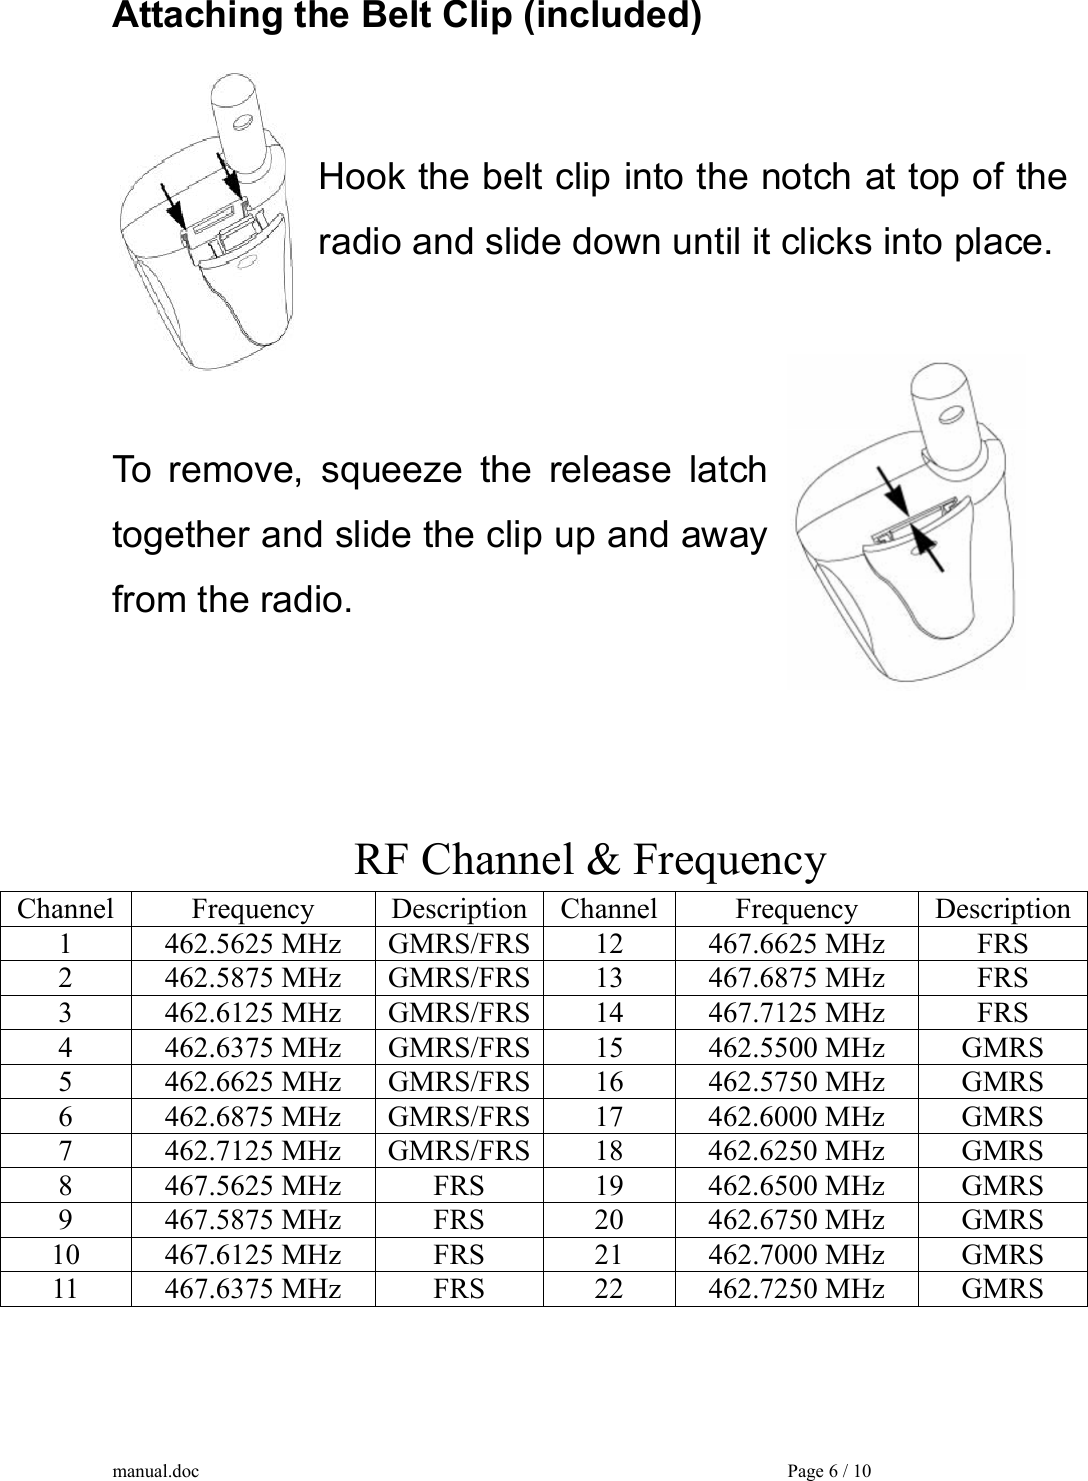 Attaching the Belt Clip (included)    Hook the belt clip into the notch at top of the radio and slide down until it clicks into place.                                   To remove, squeeze the release latch together and slide the clip up and away from the radio.       RF Channel &amp; Frequency Channel Frequency Description Channel Frequency Description 1  462.5625 MHz  GMRS/FRS 12  467.6625 MHz  FRS 2  462.5875 MHz  GMRS/FRS 13  467.6875 MHz  FRS 3  462.6125 MHz  GMRS/FRS 14  467.7125 MHz  FRS 4  462.6375 MHz  GMRS/FRS 15  462.5500 MHz  GMRS 5  462.6625 MHz  GMRS/FRS 16  462.5750 MHz  GMRS 6  462.6875 MHz  GMRS/FRS 17  462.6000 MHz  GMRS 7  462.7125 MHz  GMRS/FRS 18  462.6250 MHz  GMRS 8  467.5625 MHz  FRS  19  462.6500 MHz  GMRS 9  467.5875 MHz  FRS  20  462.6750 MHz  GMRS 10 467.6125 MHz  FRS  21 462.7000 MHz GMRS 11  467.6375 MHz  FRS  22  462.7250 MHz  GMRS   manual.doc    Page 6 / 10 